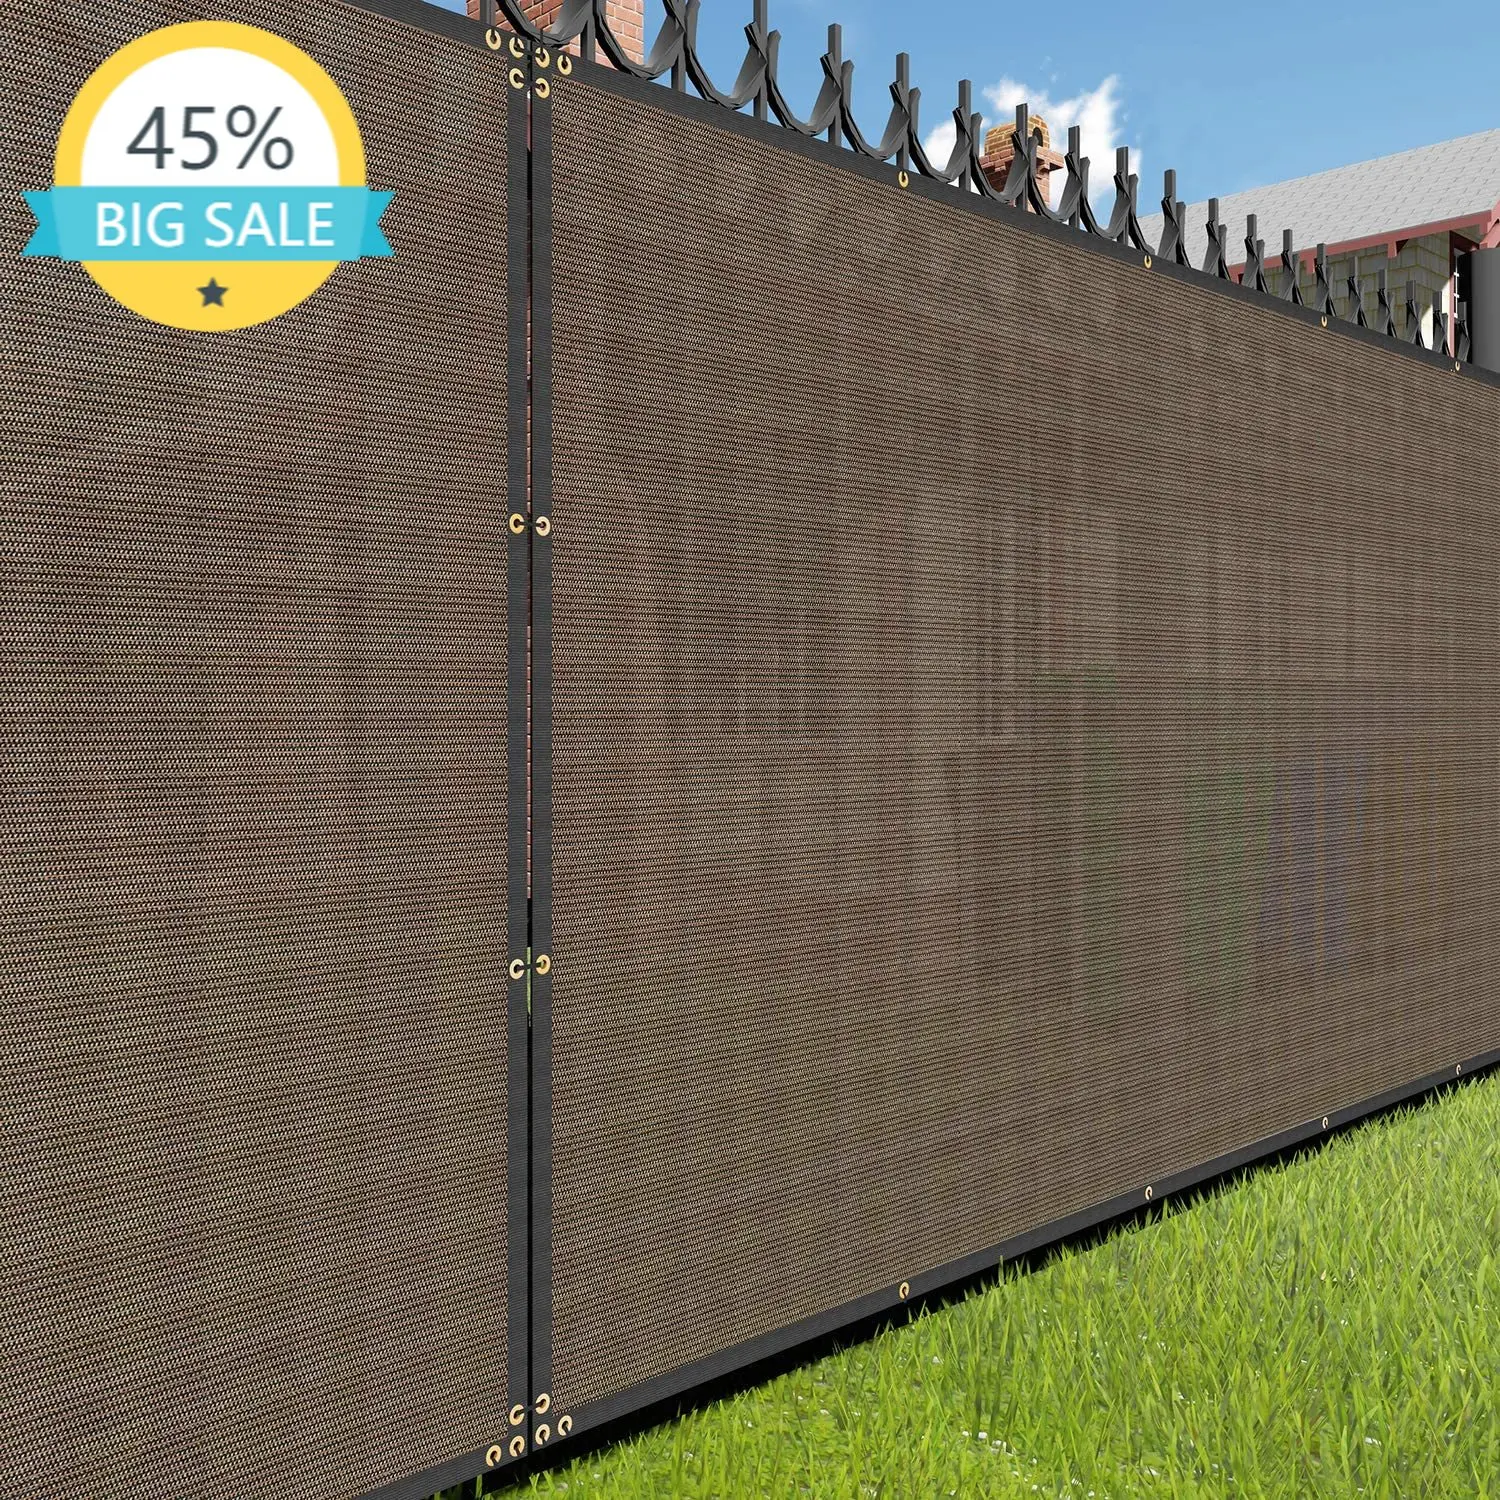 

Brown Fence Privacy Screen, Commercial Outdoor Backyard Shade Windscreen Mesh Fabric 90% Blockage Balcony